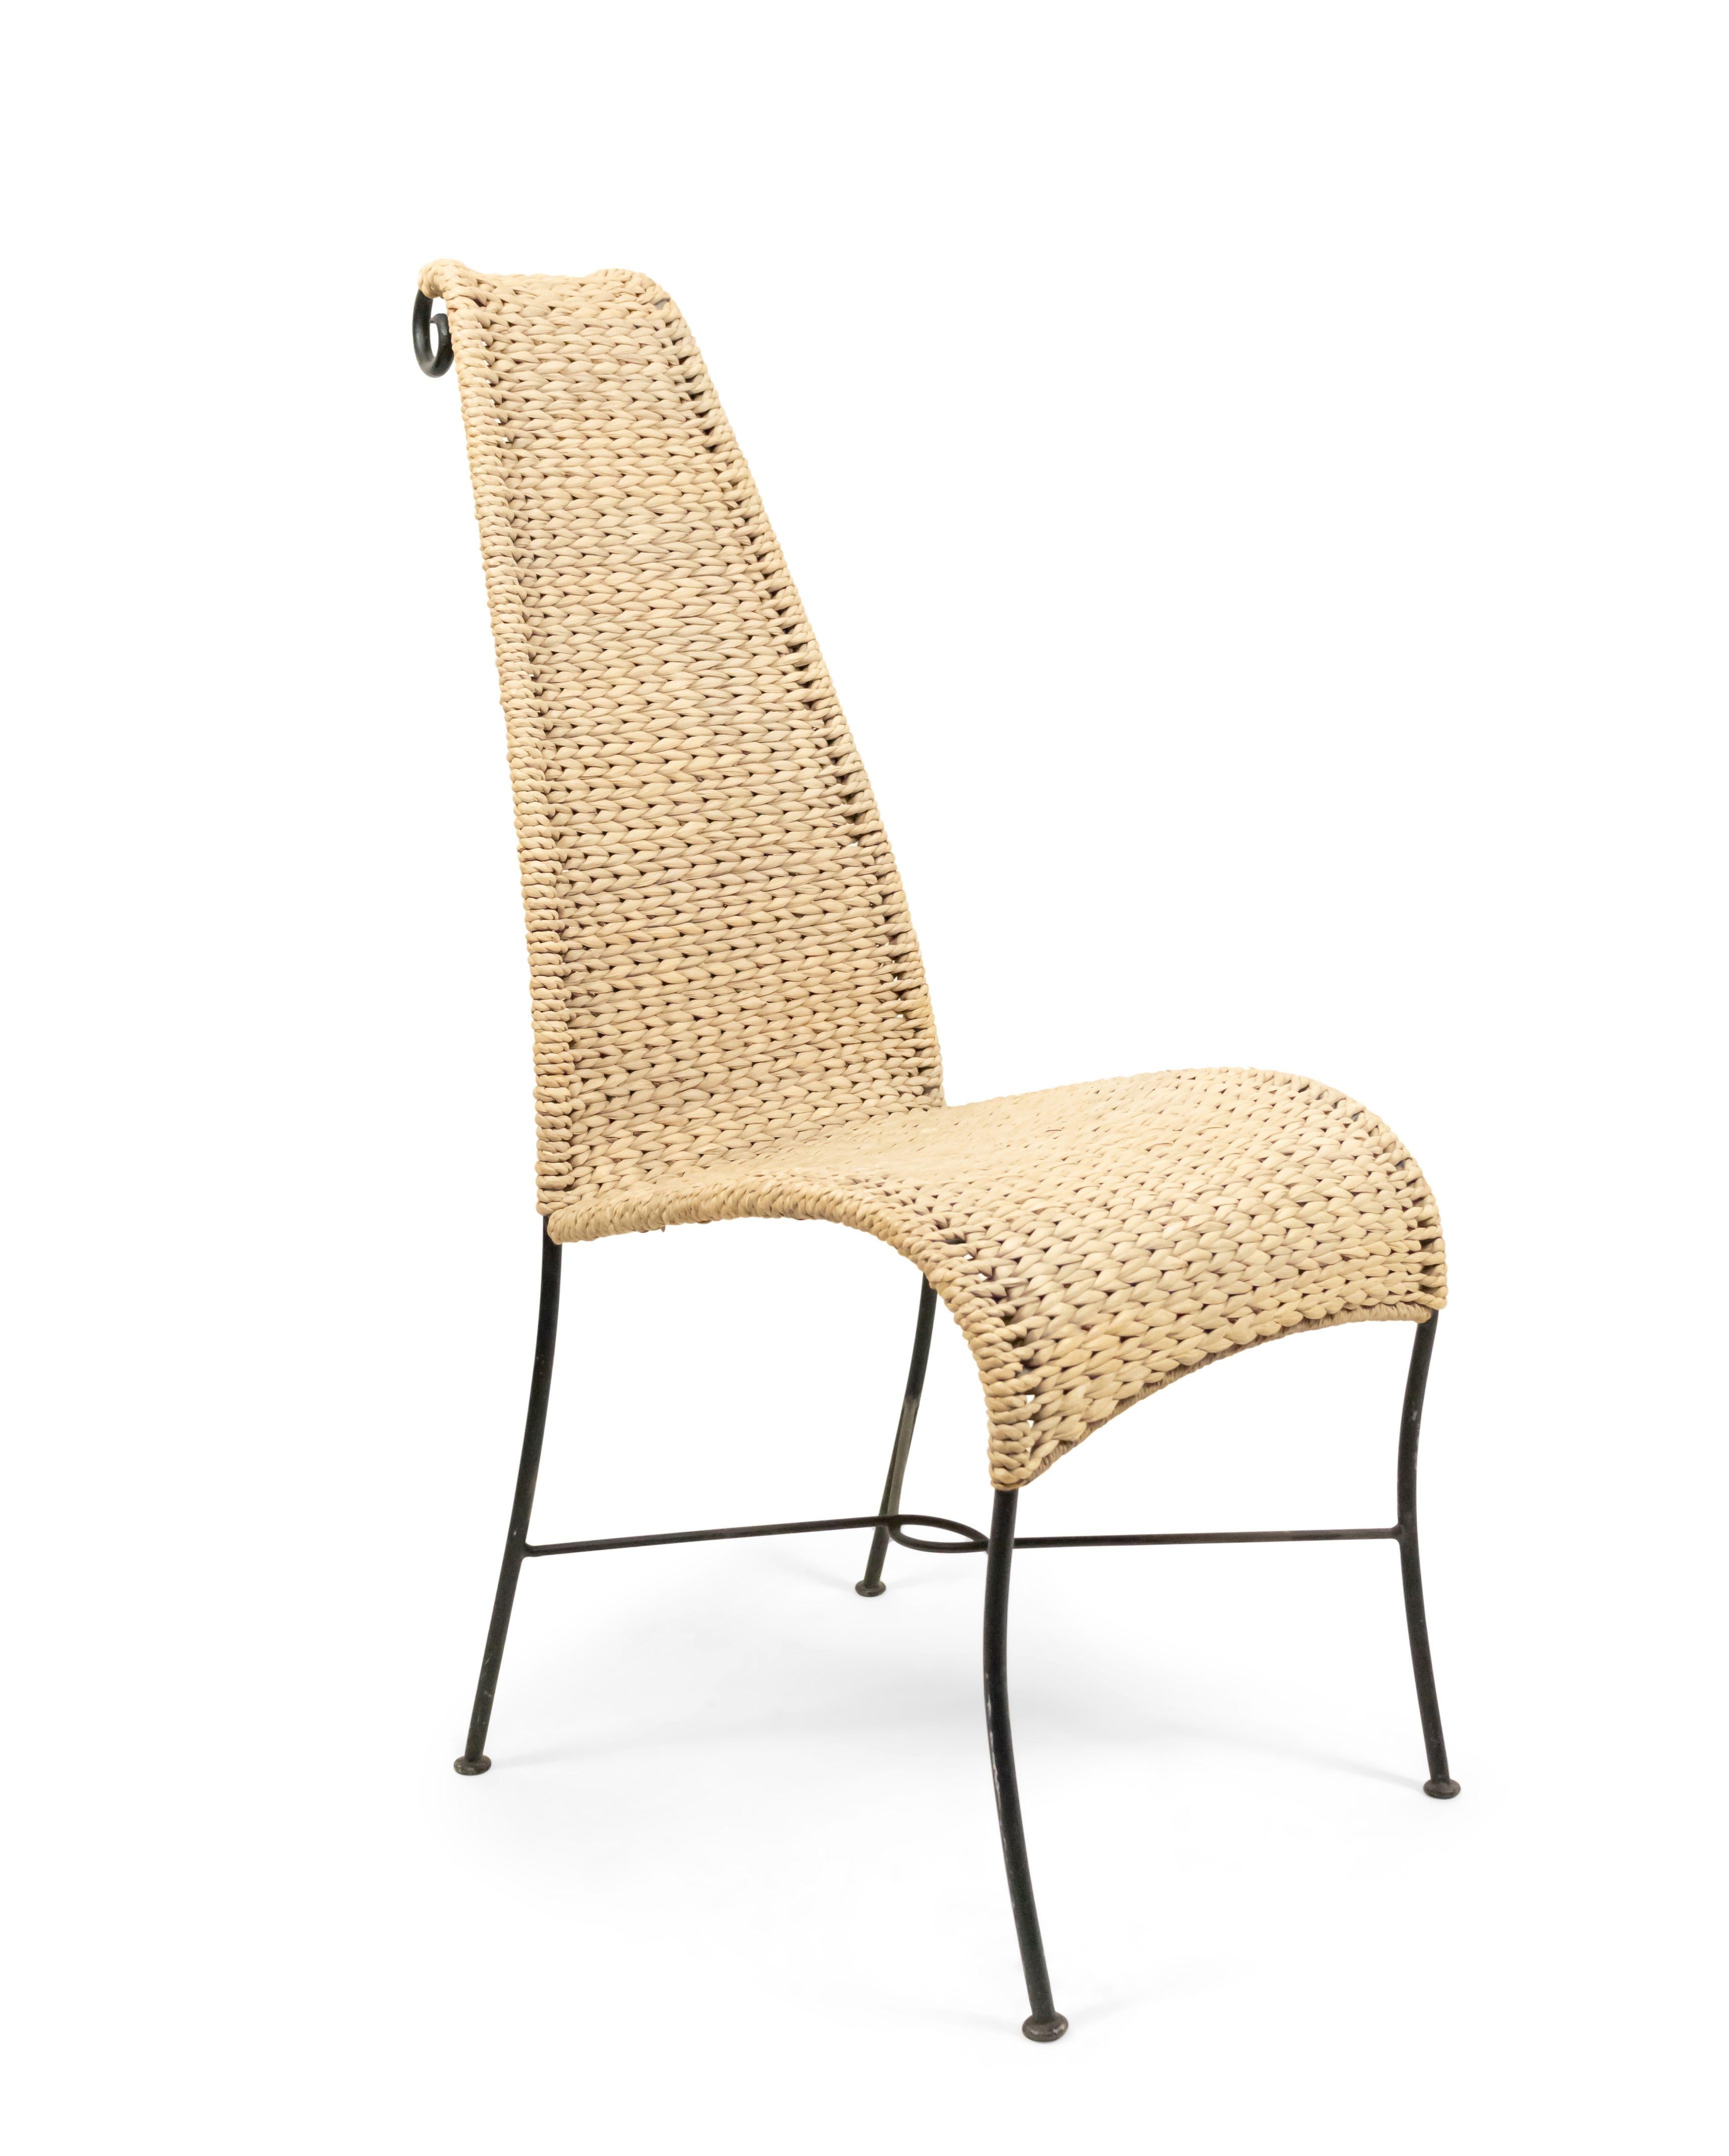 20th Century American Post-War Rattan Side Chair For Sale